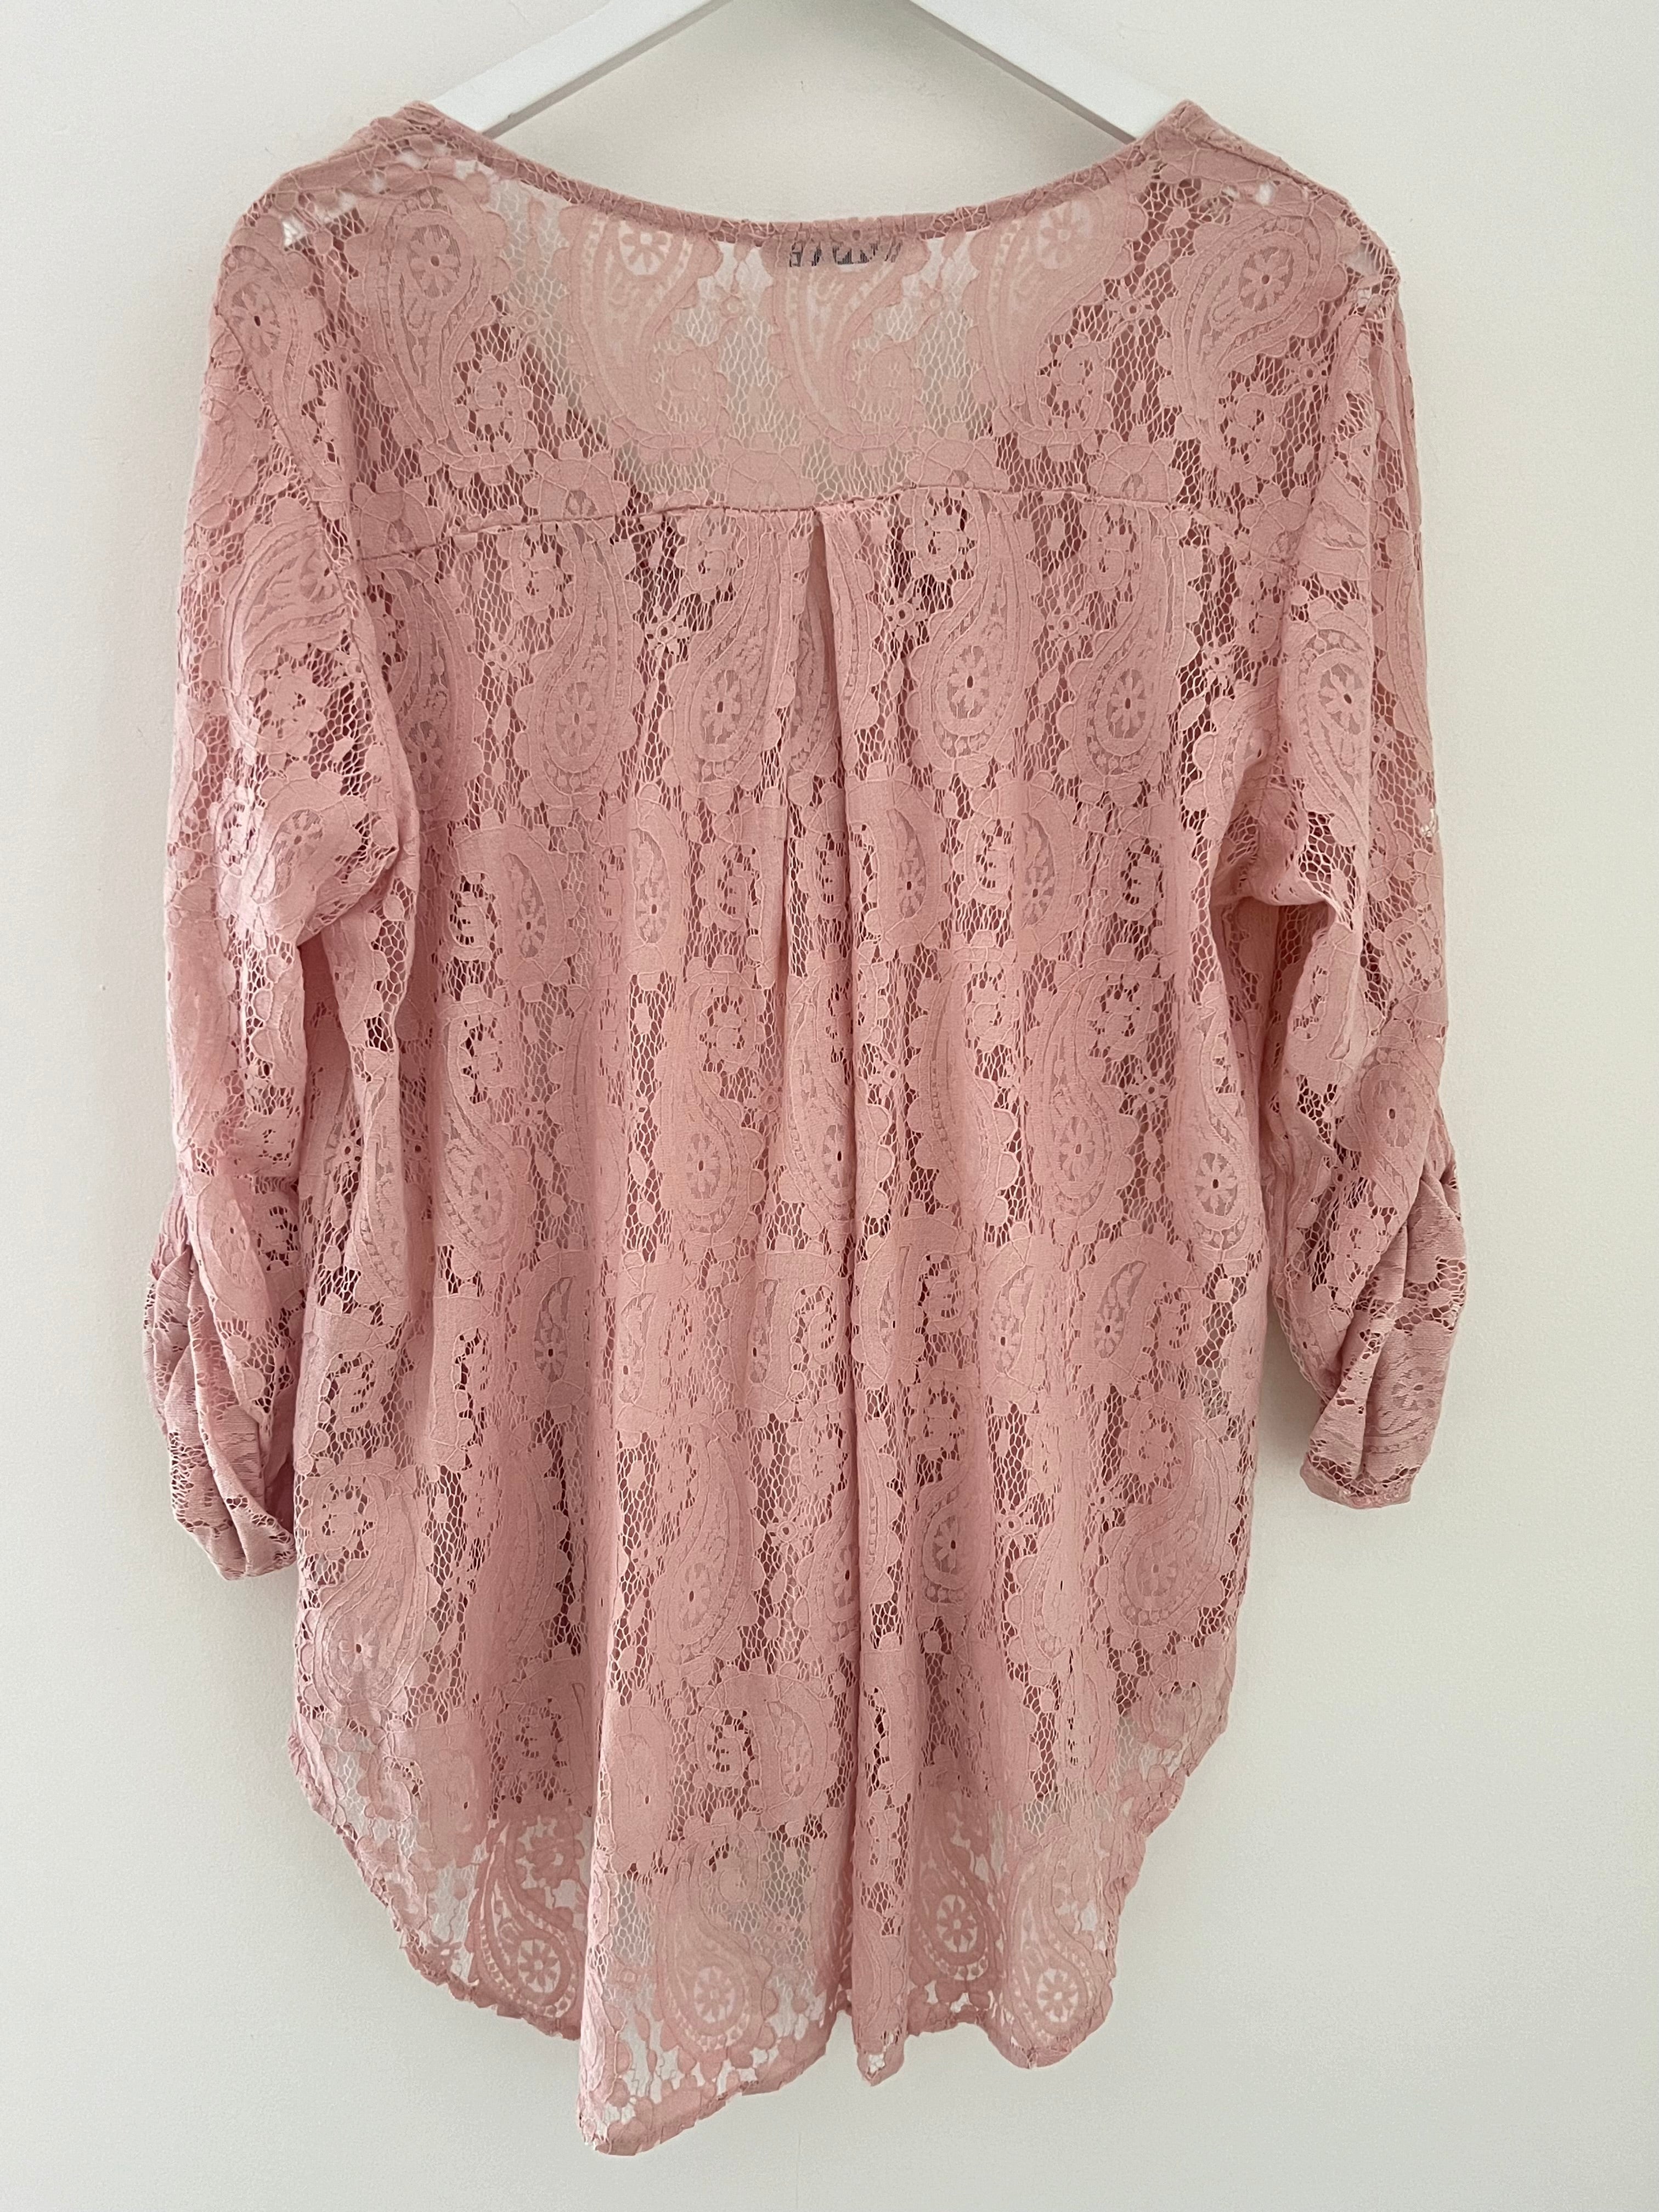 Lace Blouse & Cami in Soft Pink